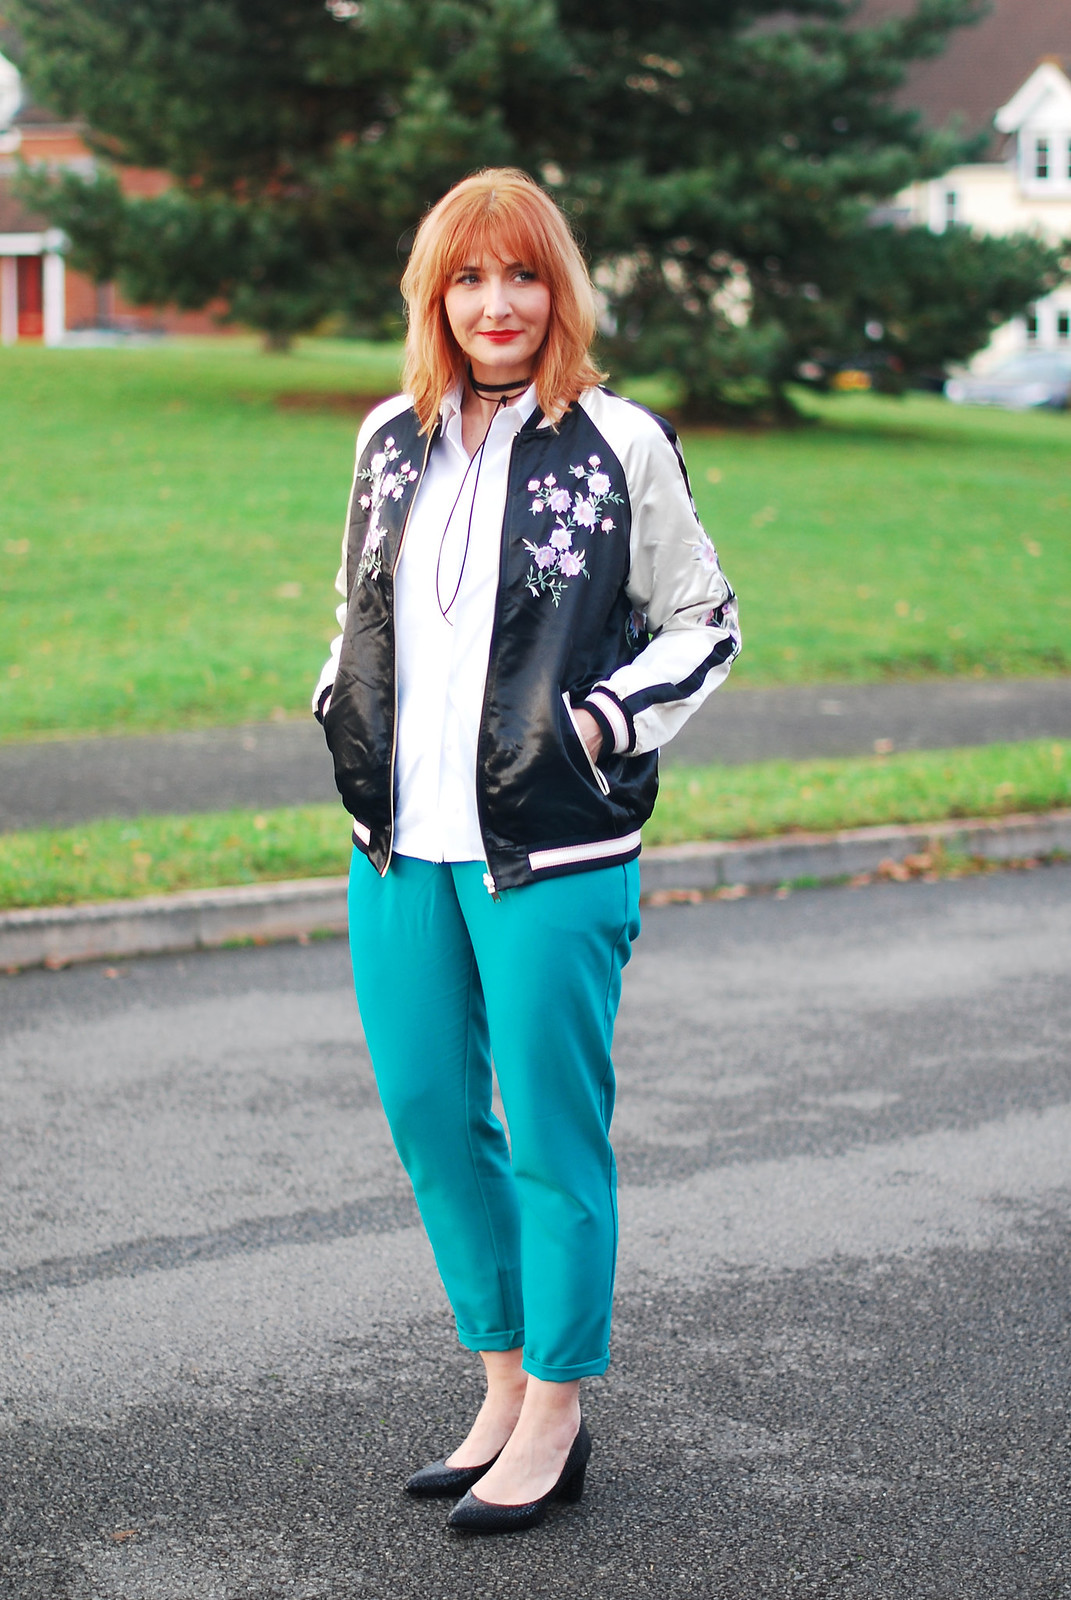 Smart casual weekend wear floral embroidered bomber jacket emerald green peg leg trousers black block heel shoes white shirt black tie-up choker necklace | Not Dressed As Lamb, over 40 style